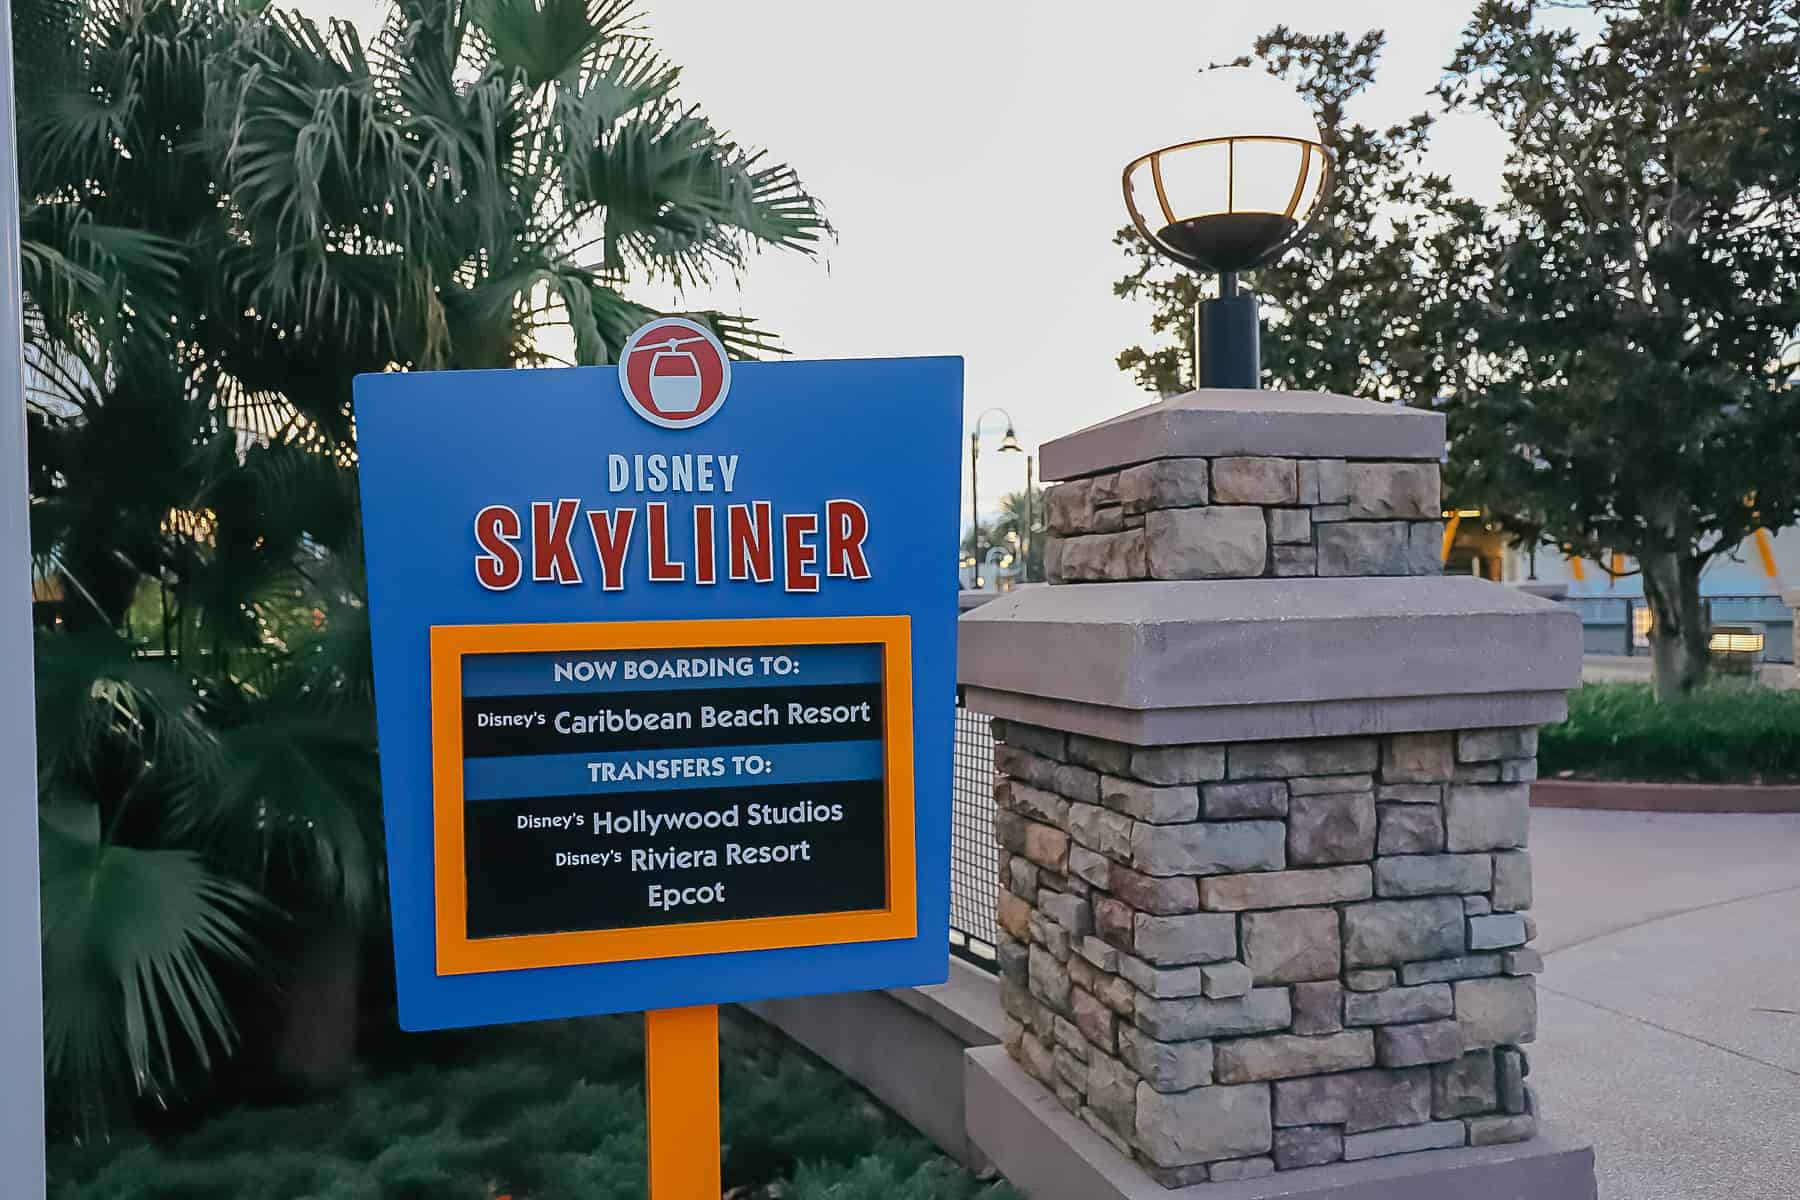 a sign for the Disney Skyliner that tells it's going to Caribbean Beach with transfers 